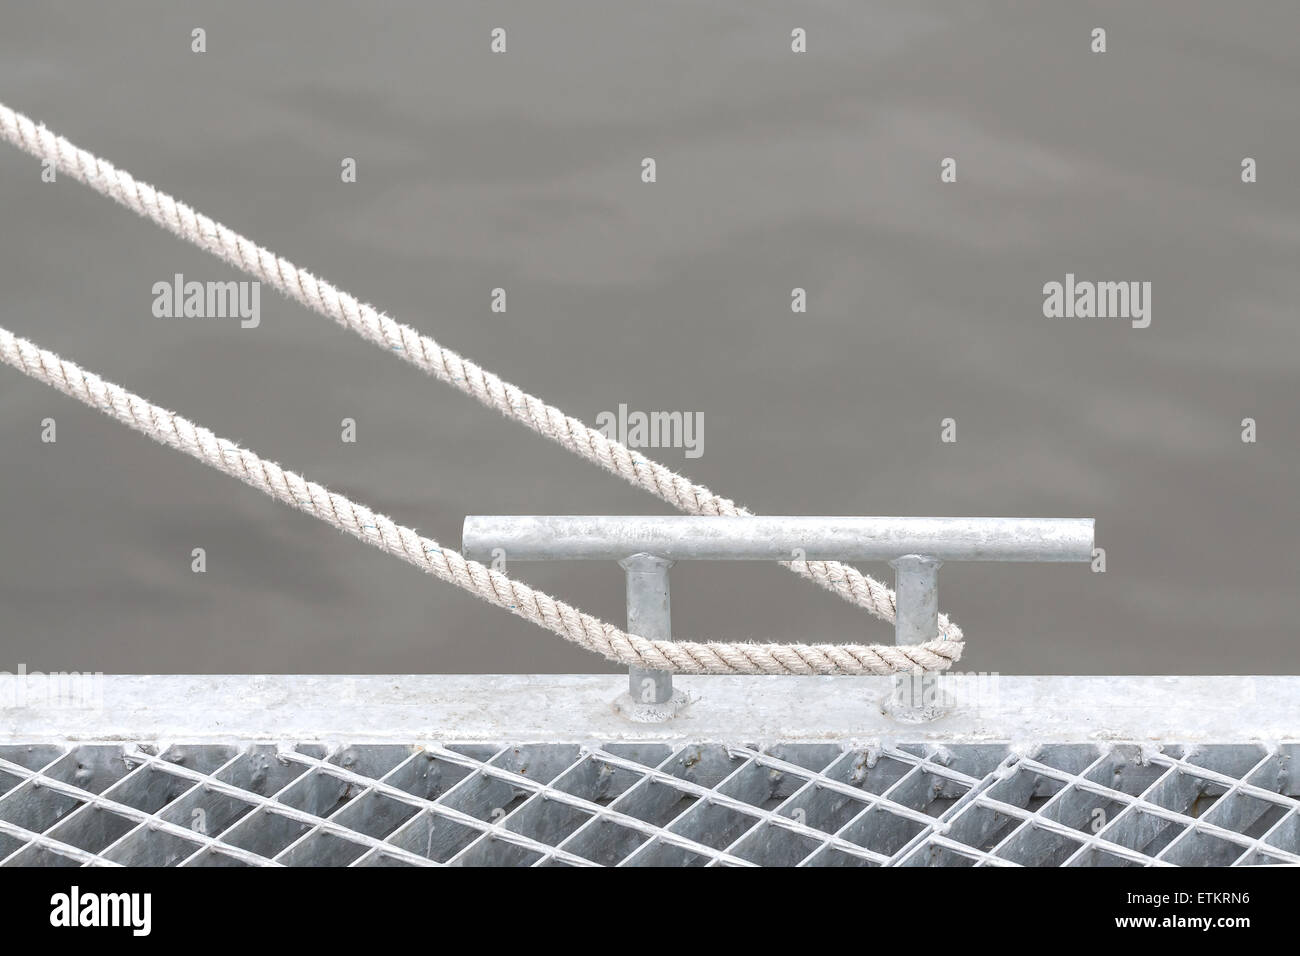 Marina bollard with rope, marine background with space for text. Stock Photo